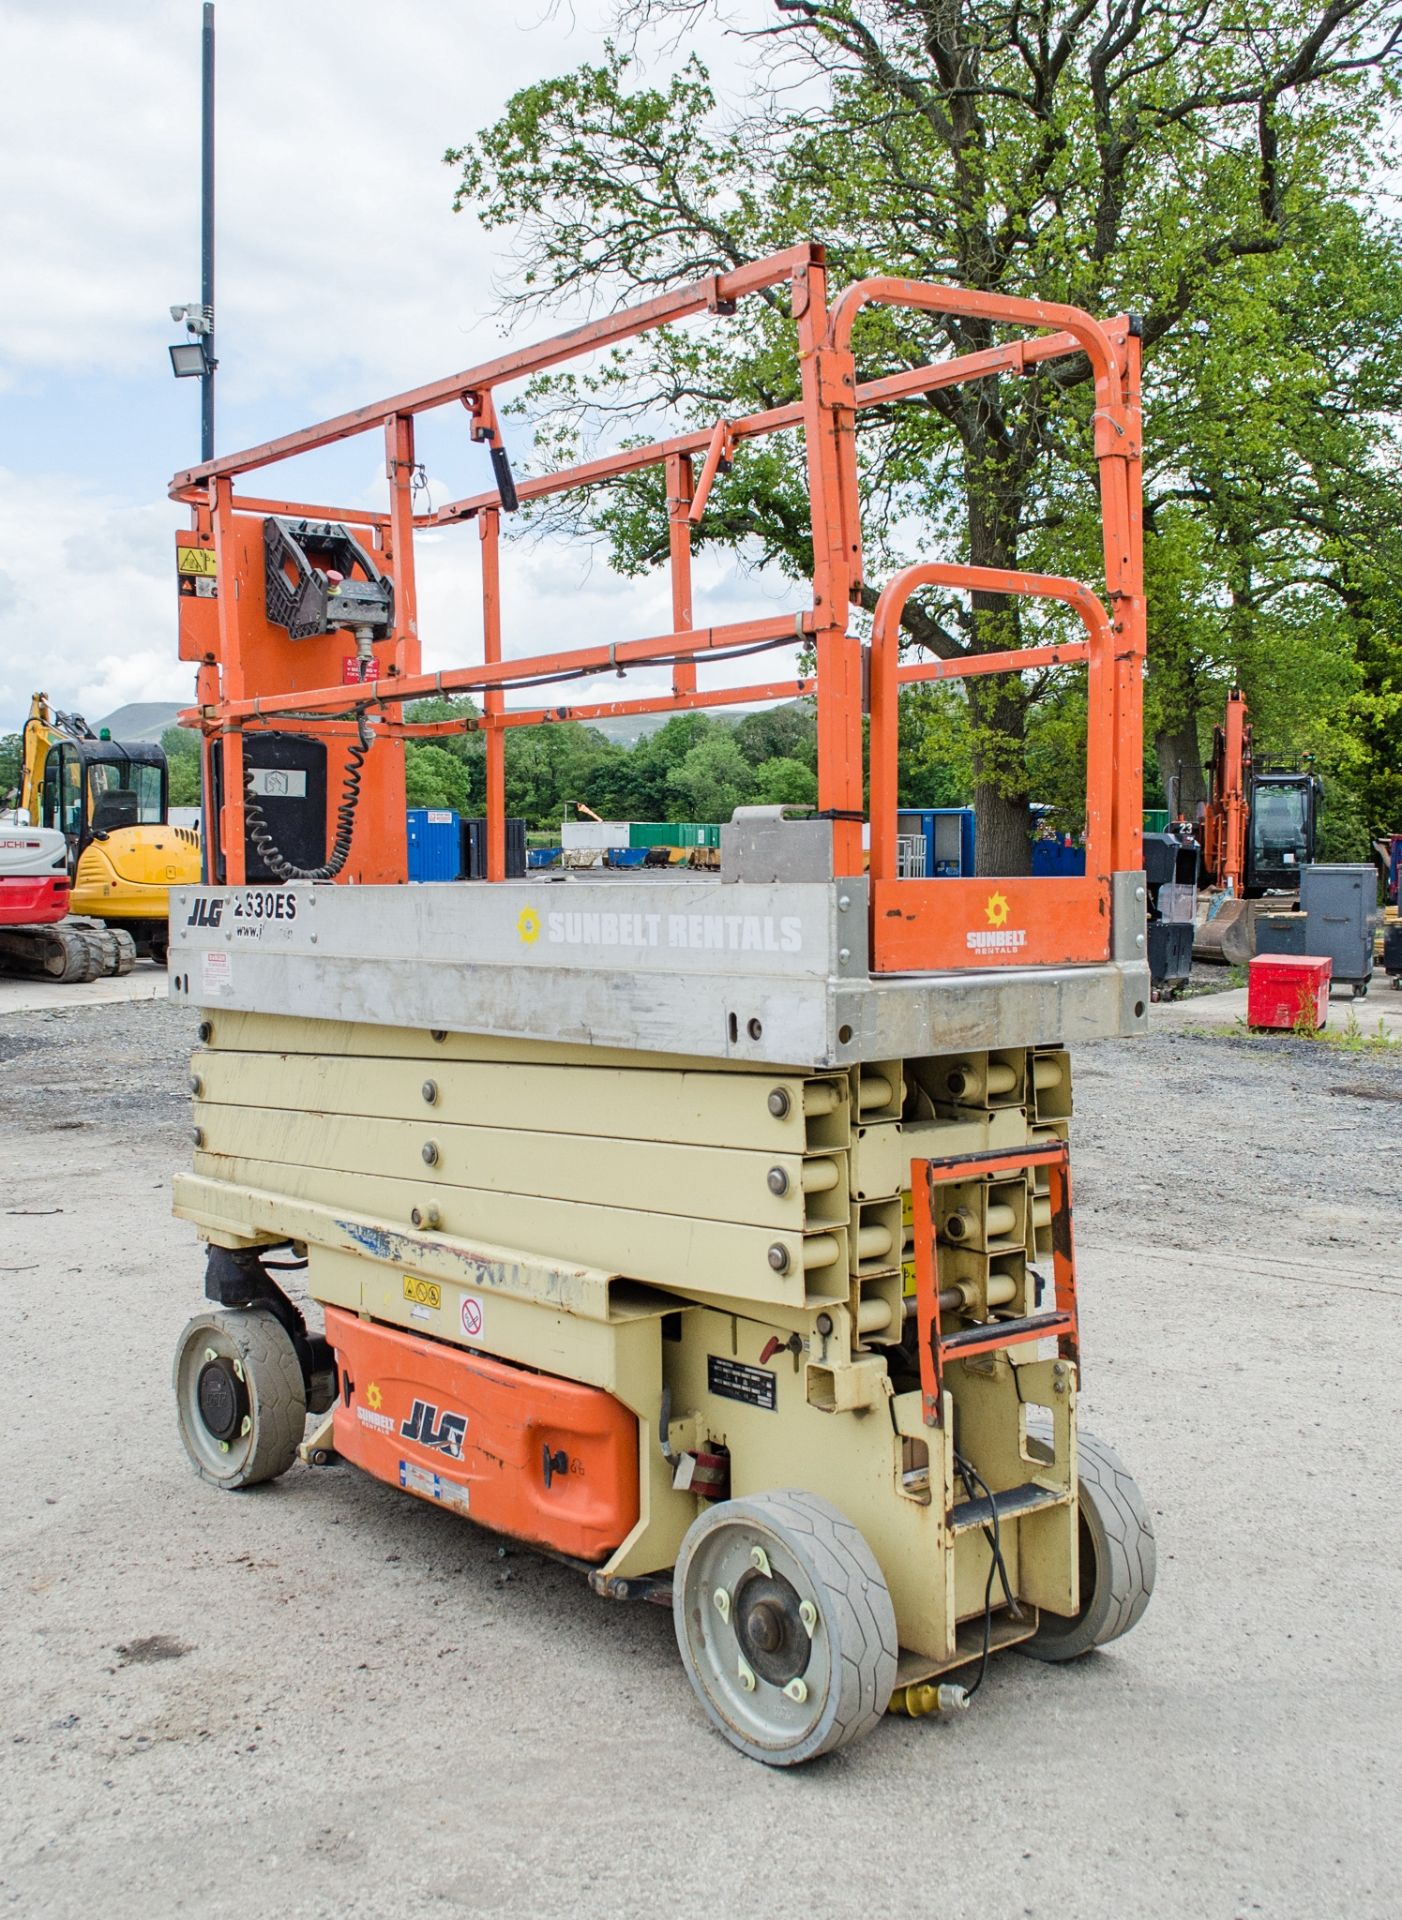 JLG 2630 ES battery electric scissor lift Year: 2014 S/N: 237301 Recorded Hours: 251 A636977 - Image 2 of 10